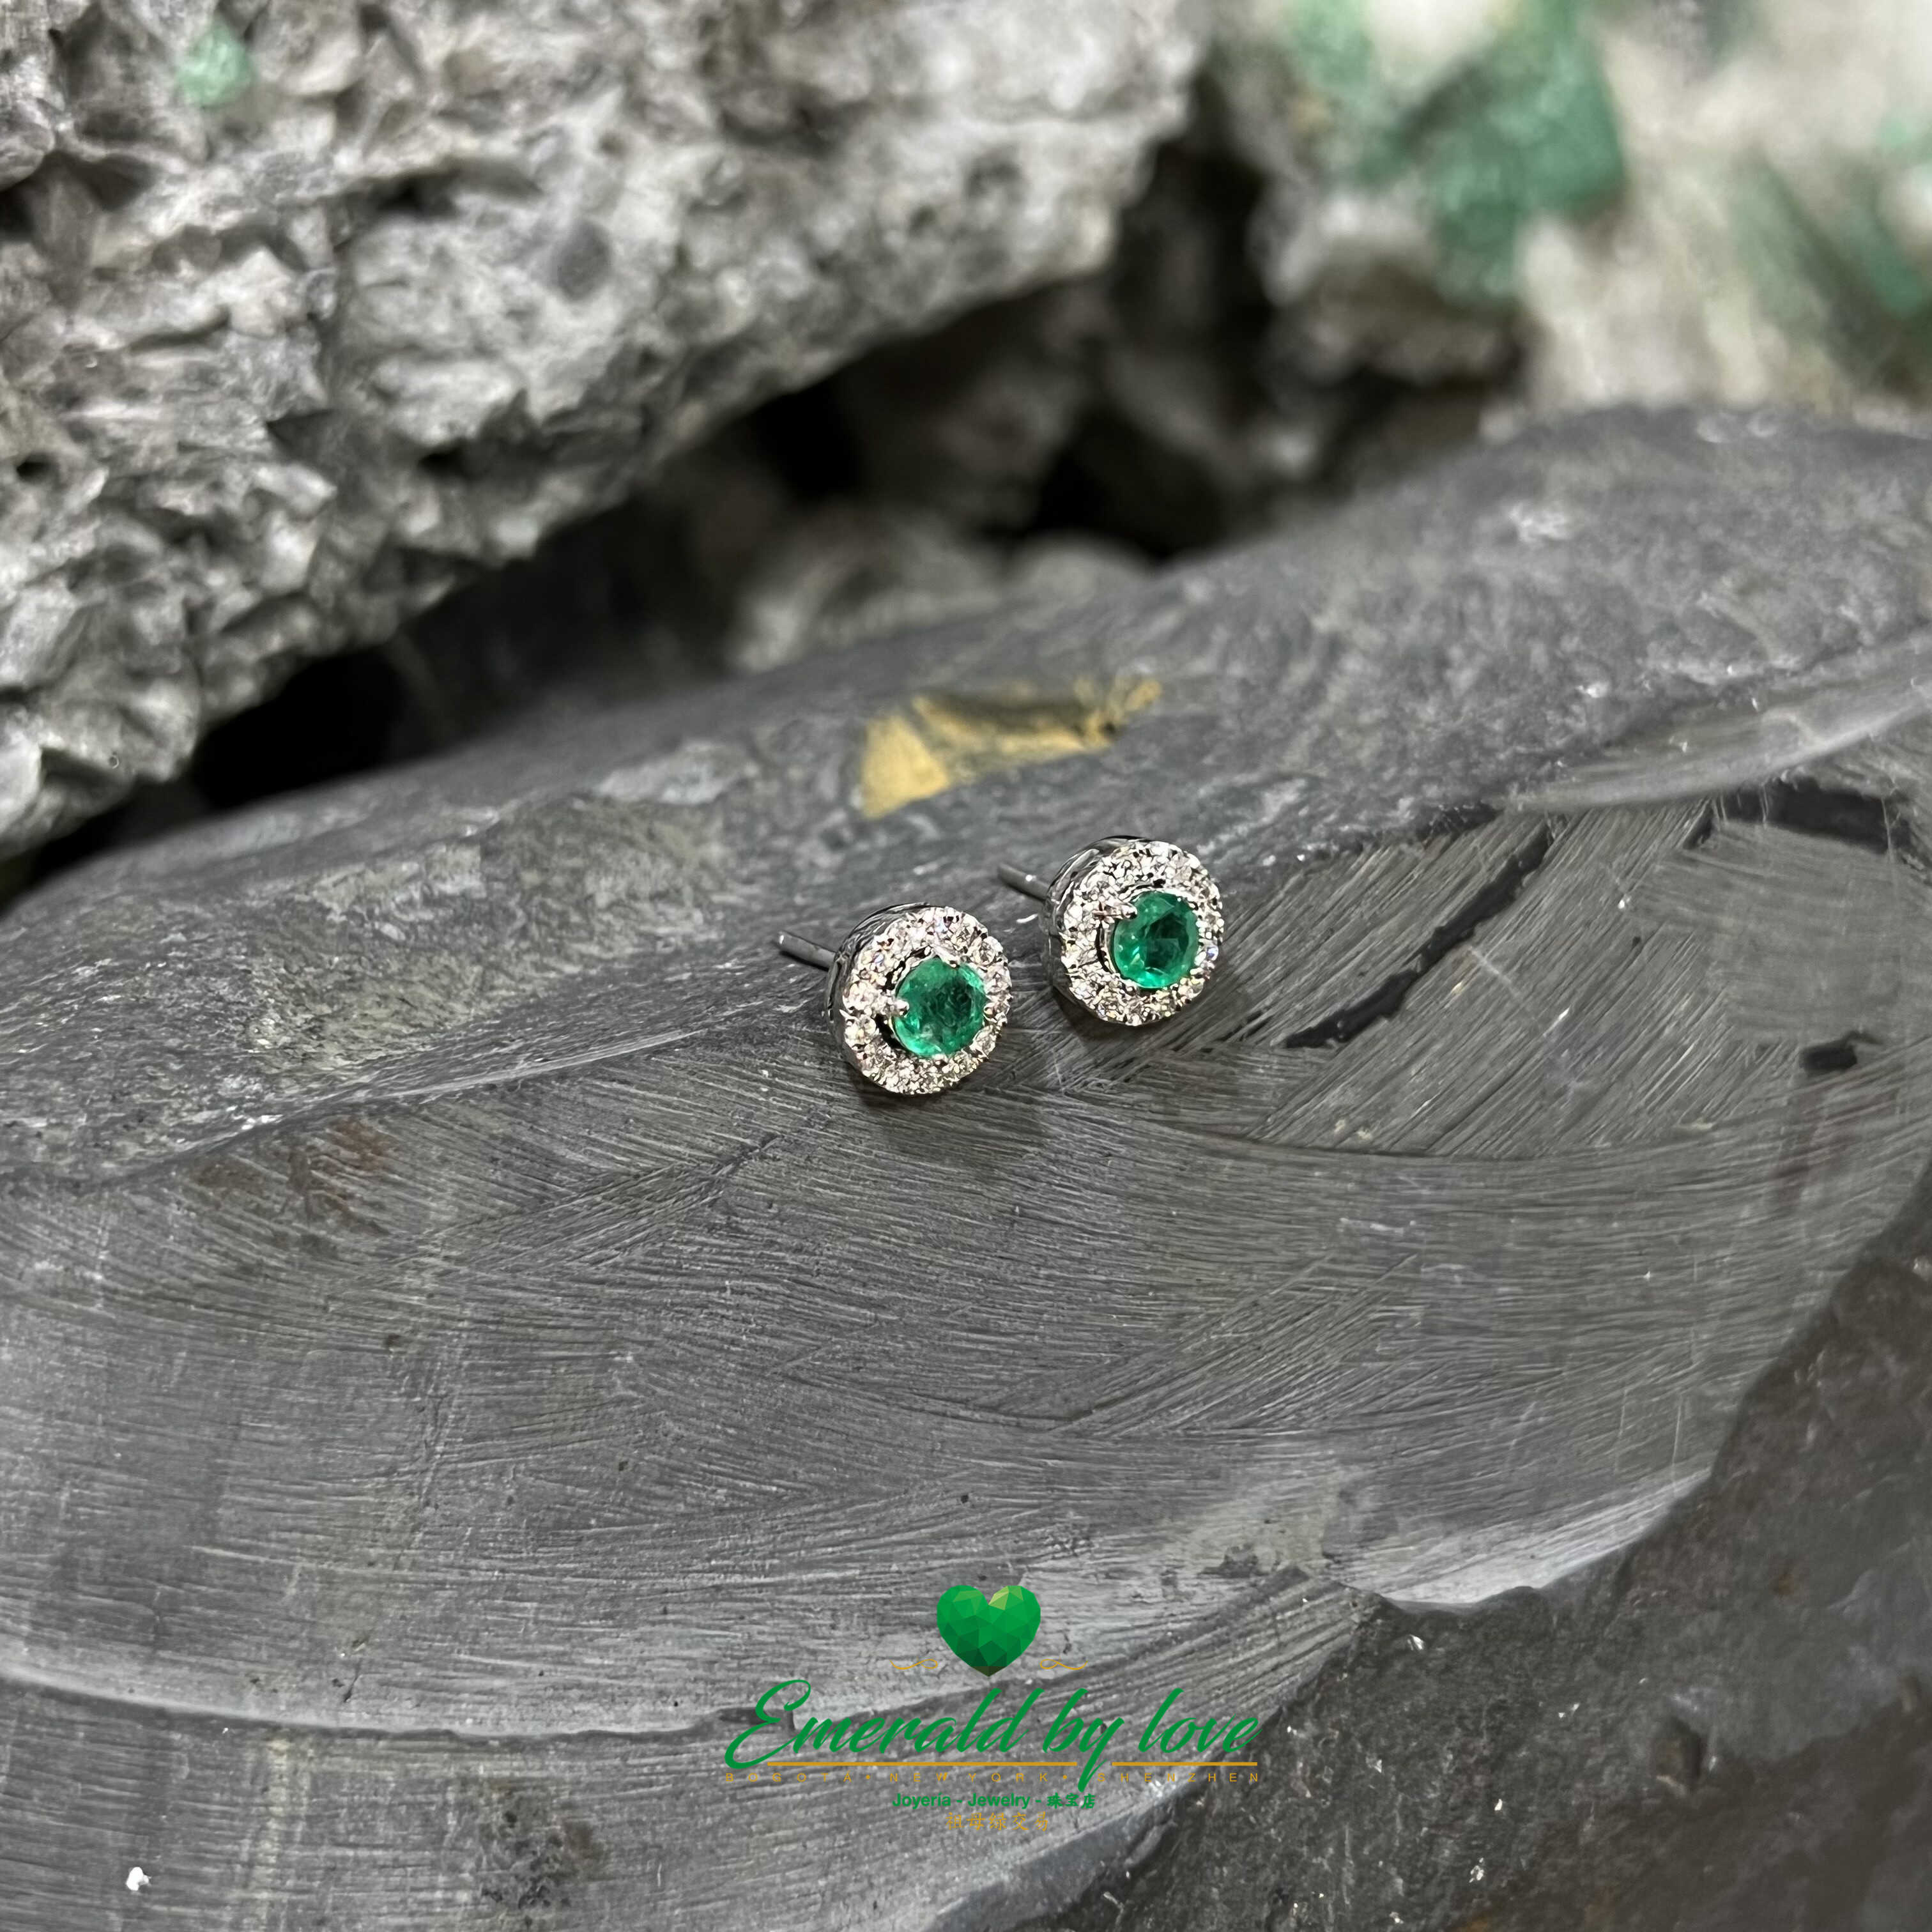 Alluring Round Colombian Emerald and Diamond White Gold Earrings